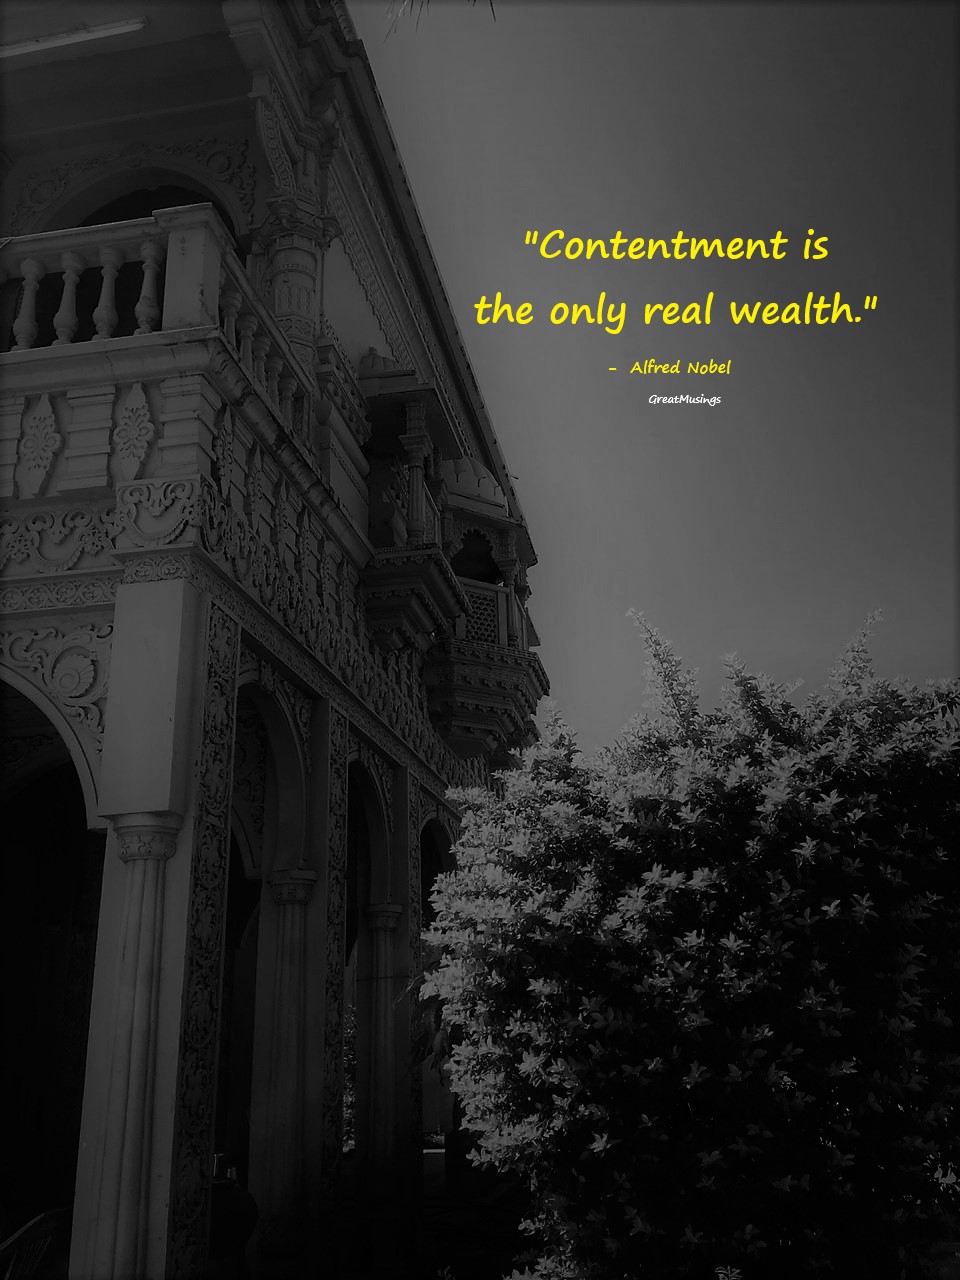 Alfred Nobel quote on a pic